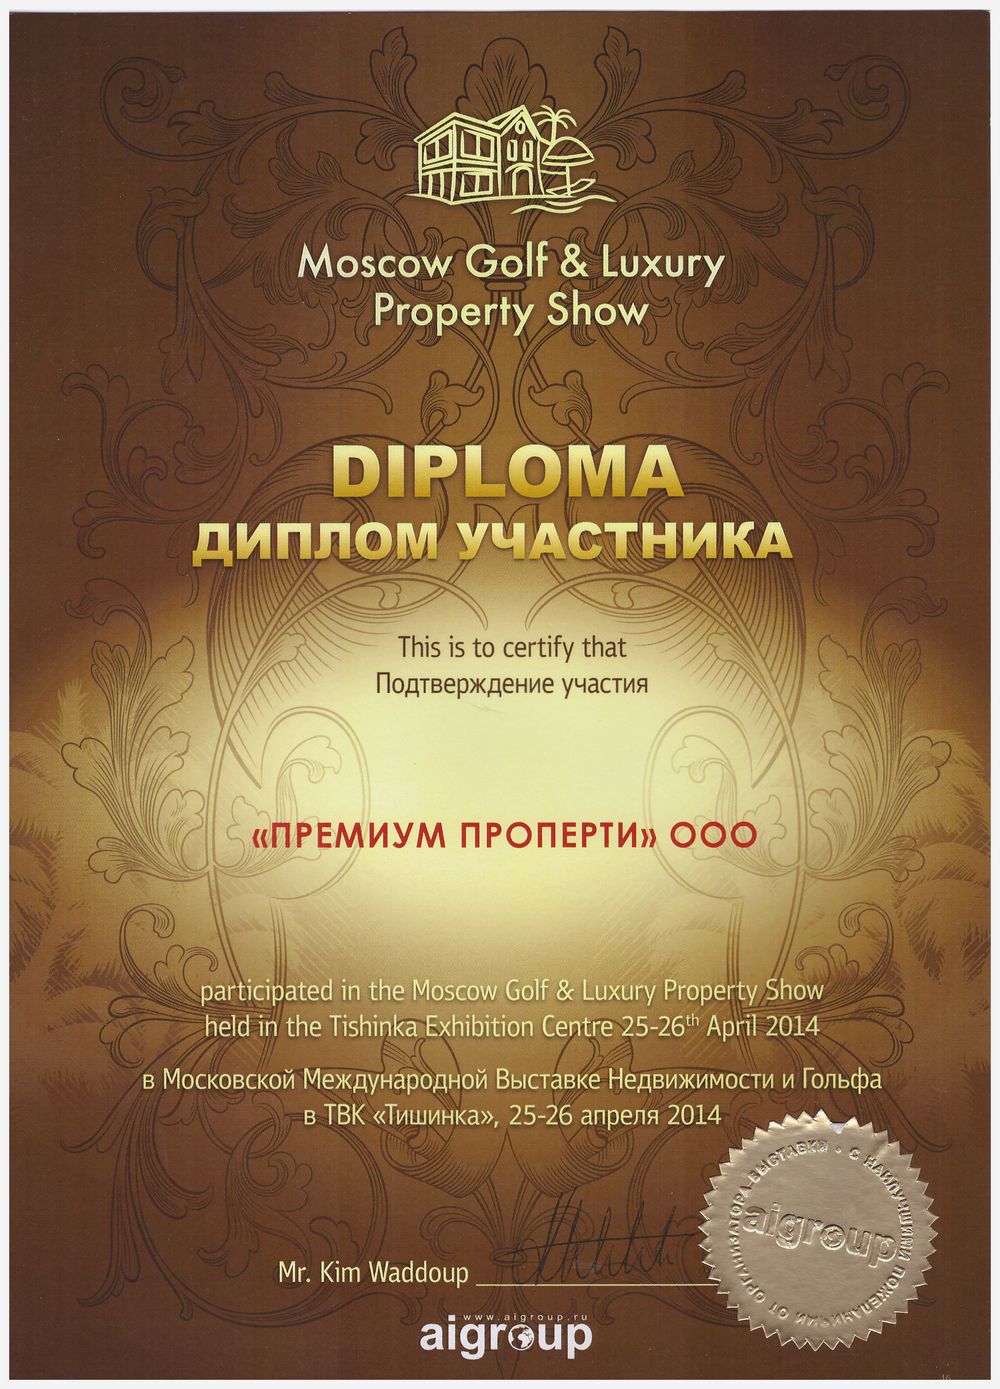 Moscow Golf & Luxury Property Show 2014